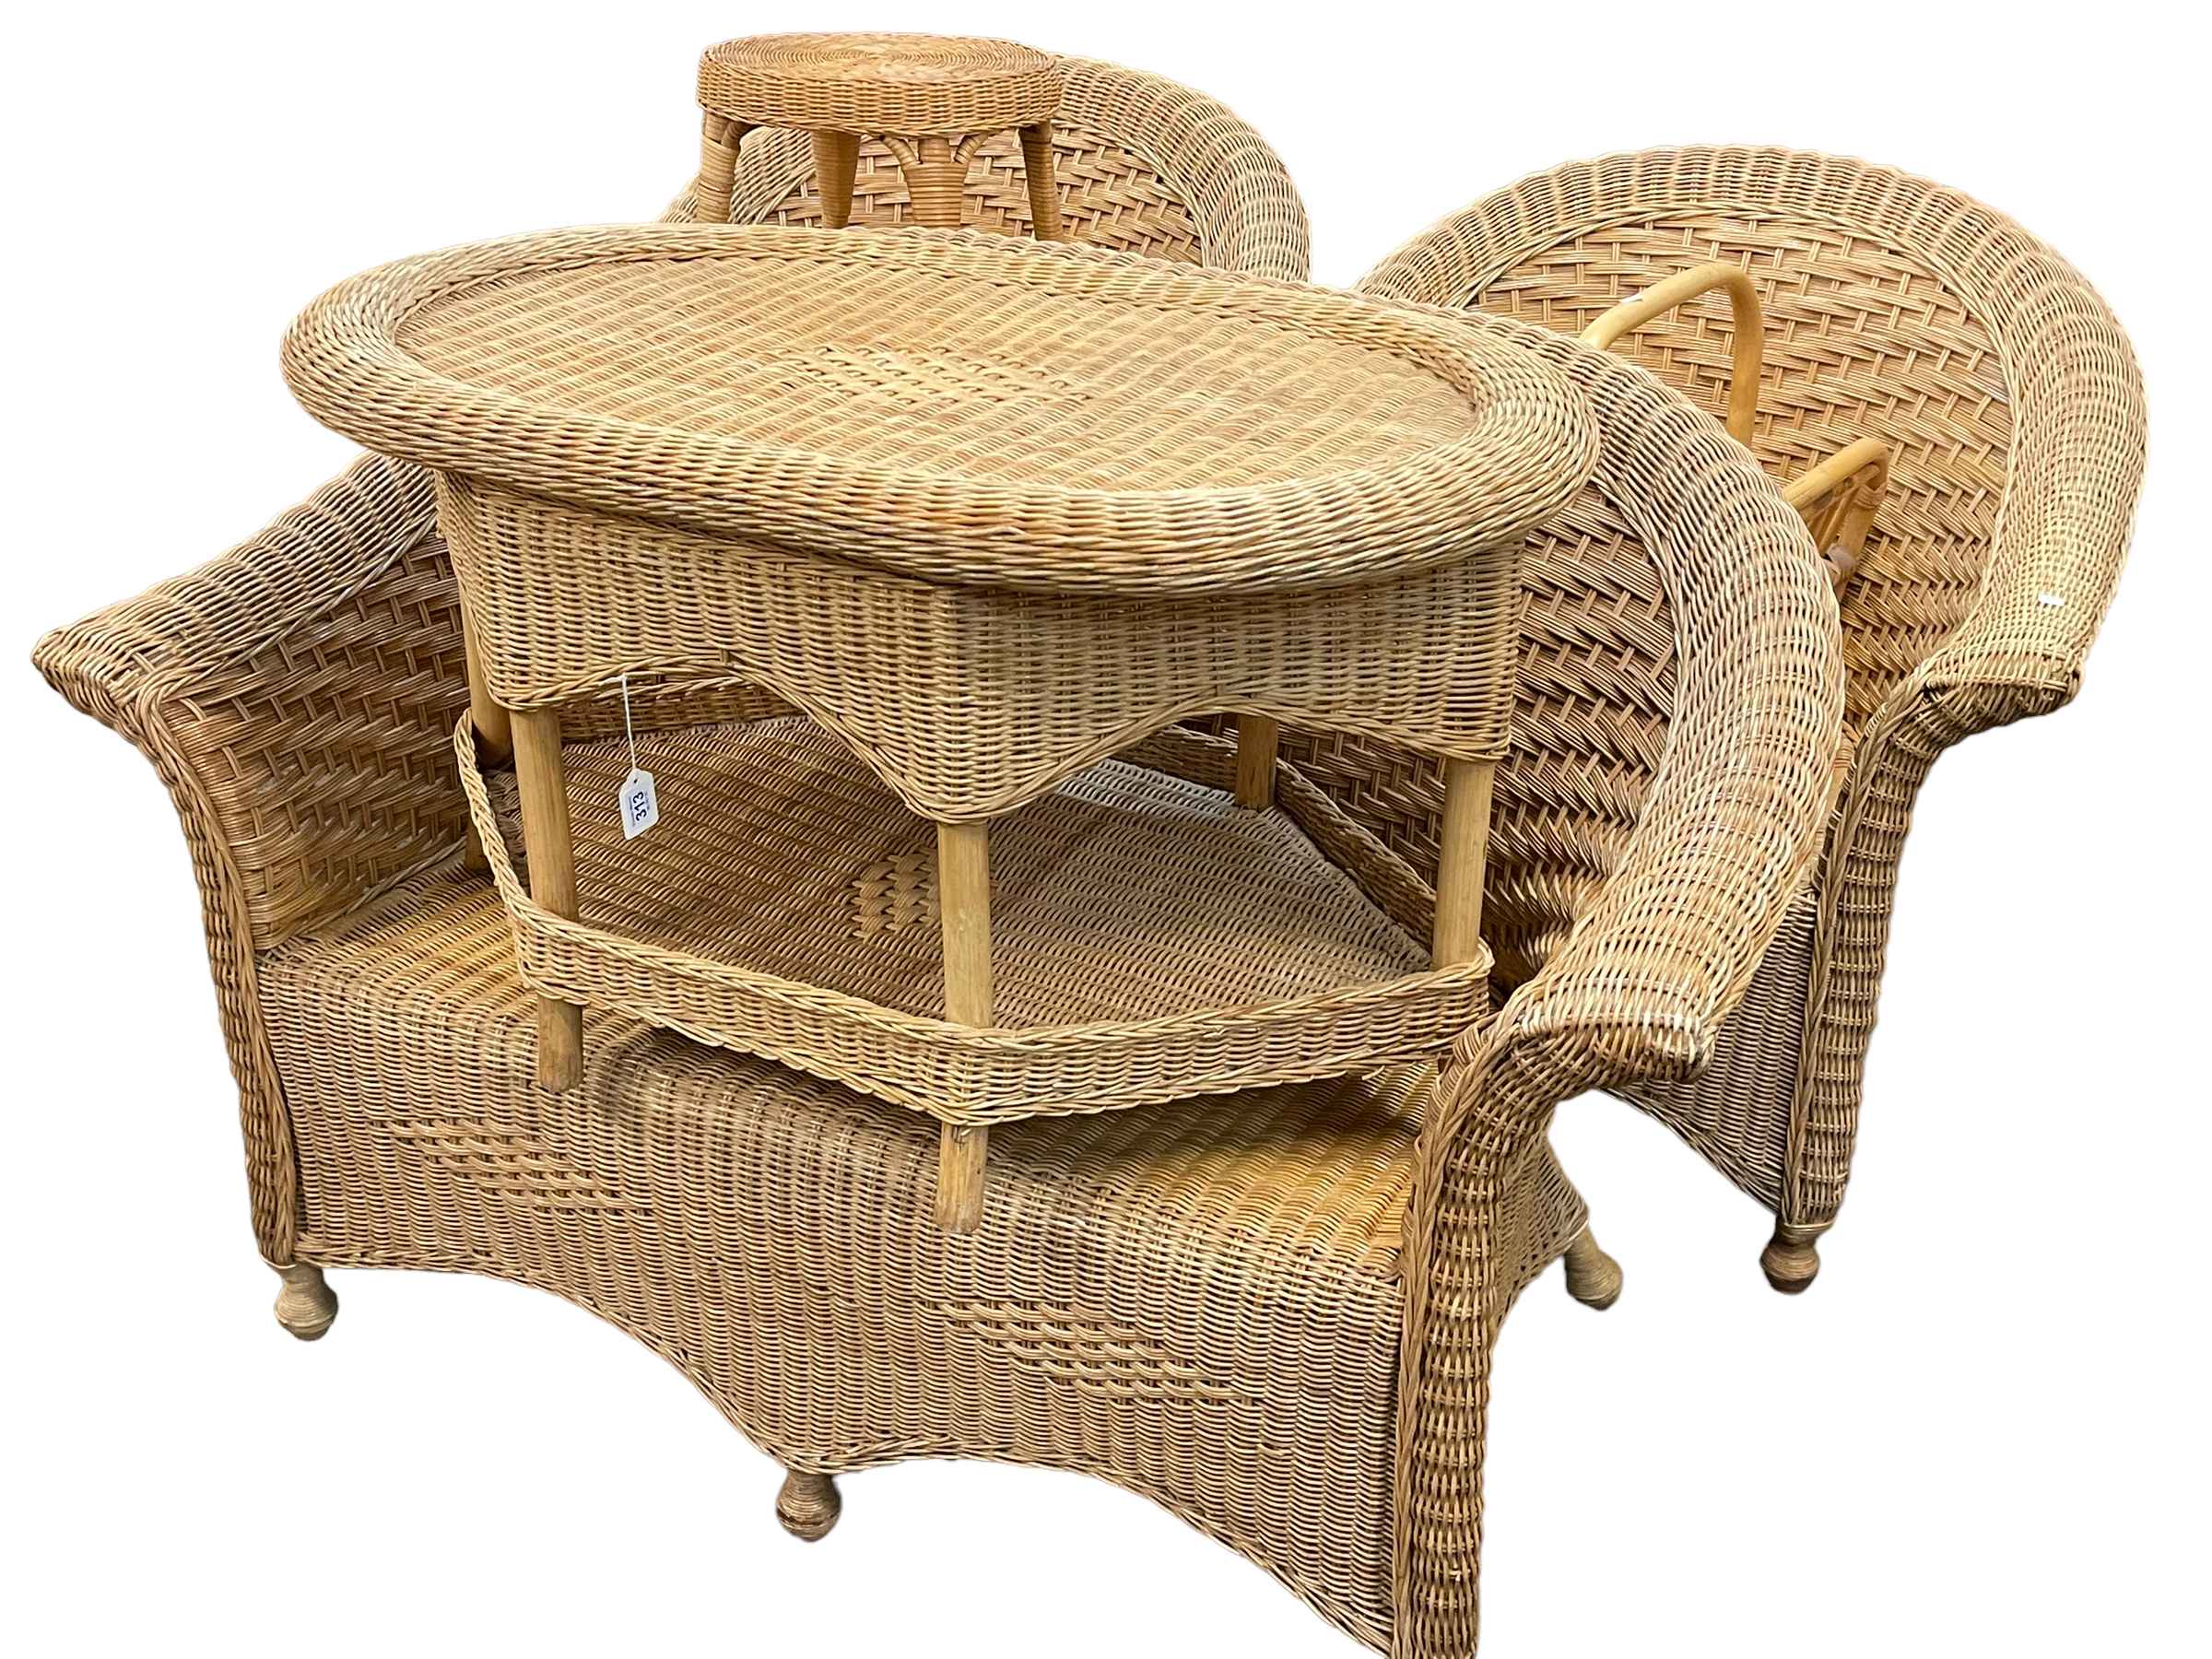 Four piece wicker conservatory suite, similar stool and cane magazine rack (6).